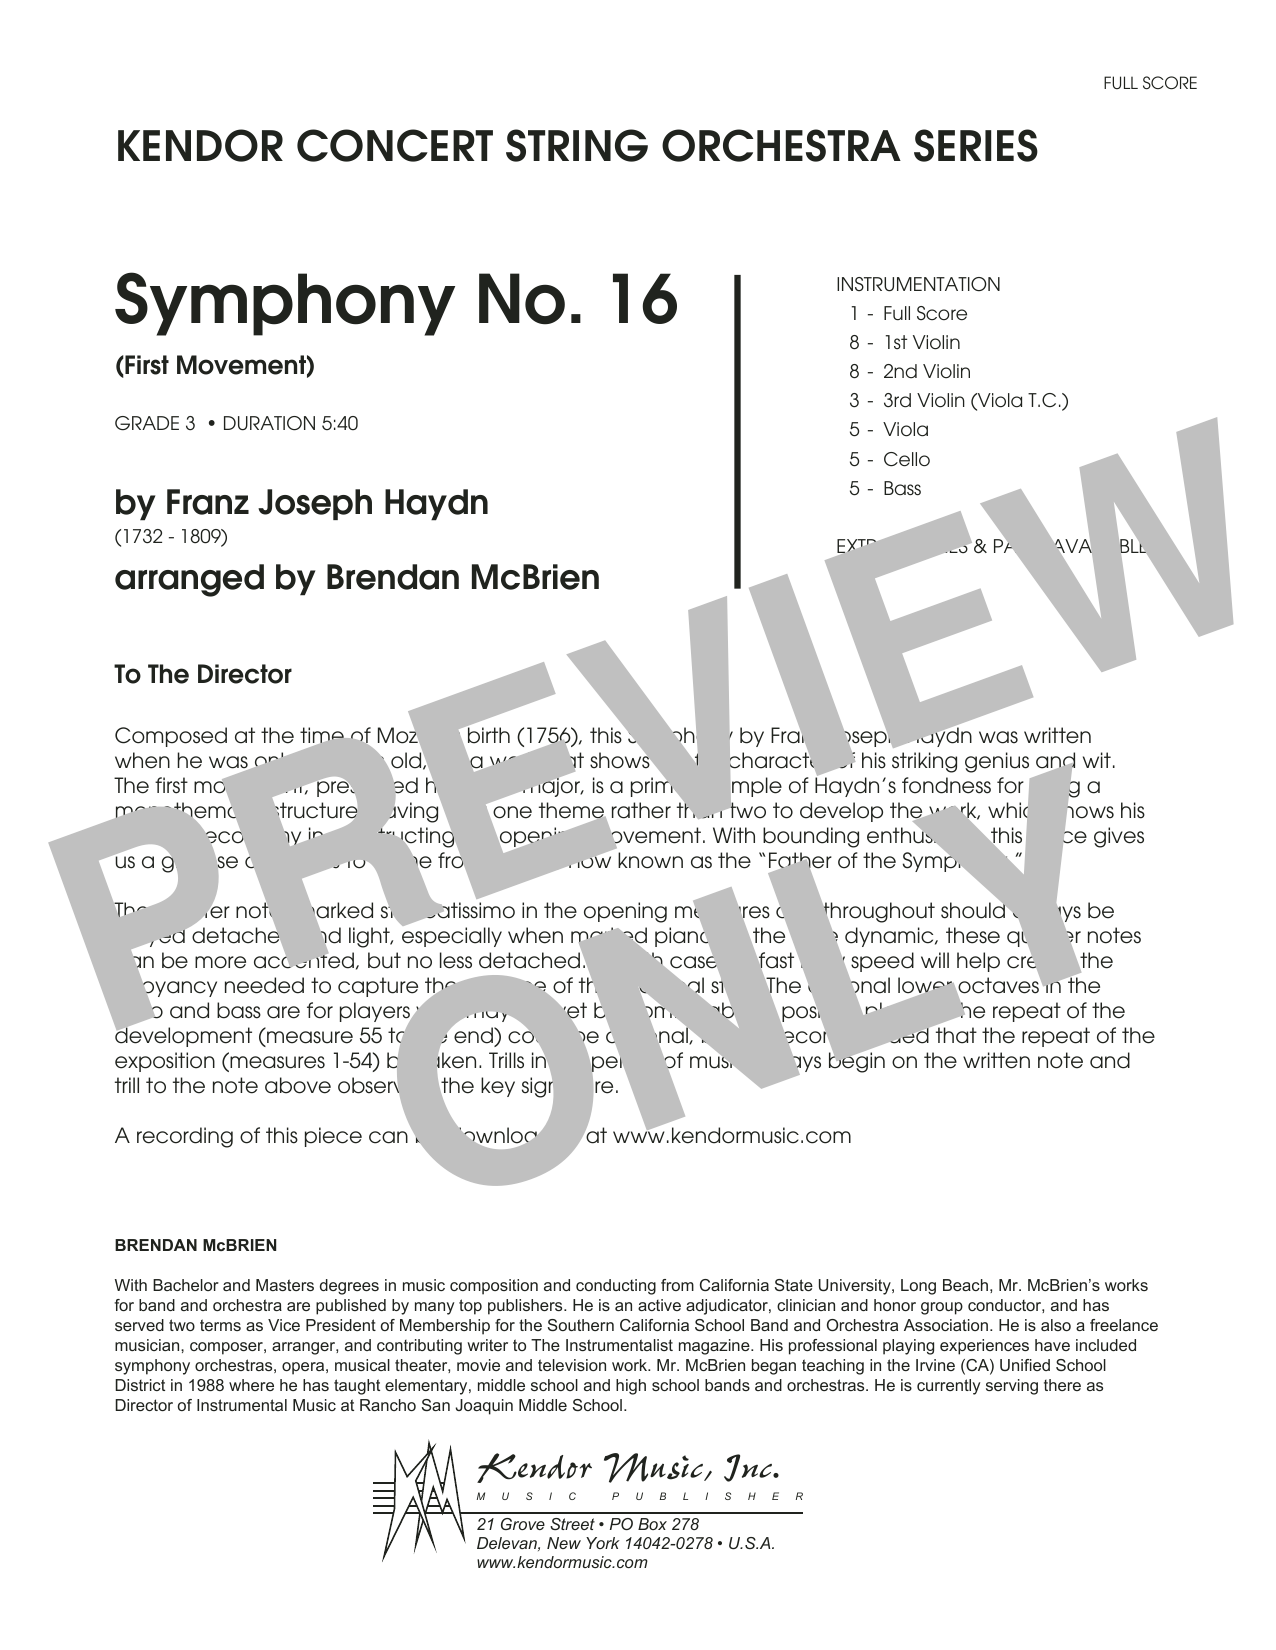 Download Brian McBrien Symphony No. 16 (First Movement) - Full Sheet Music